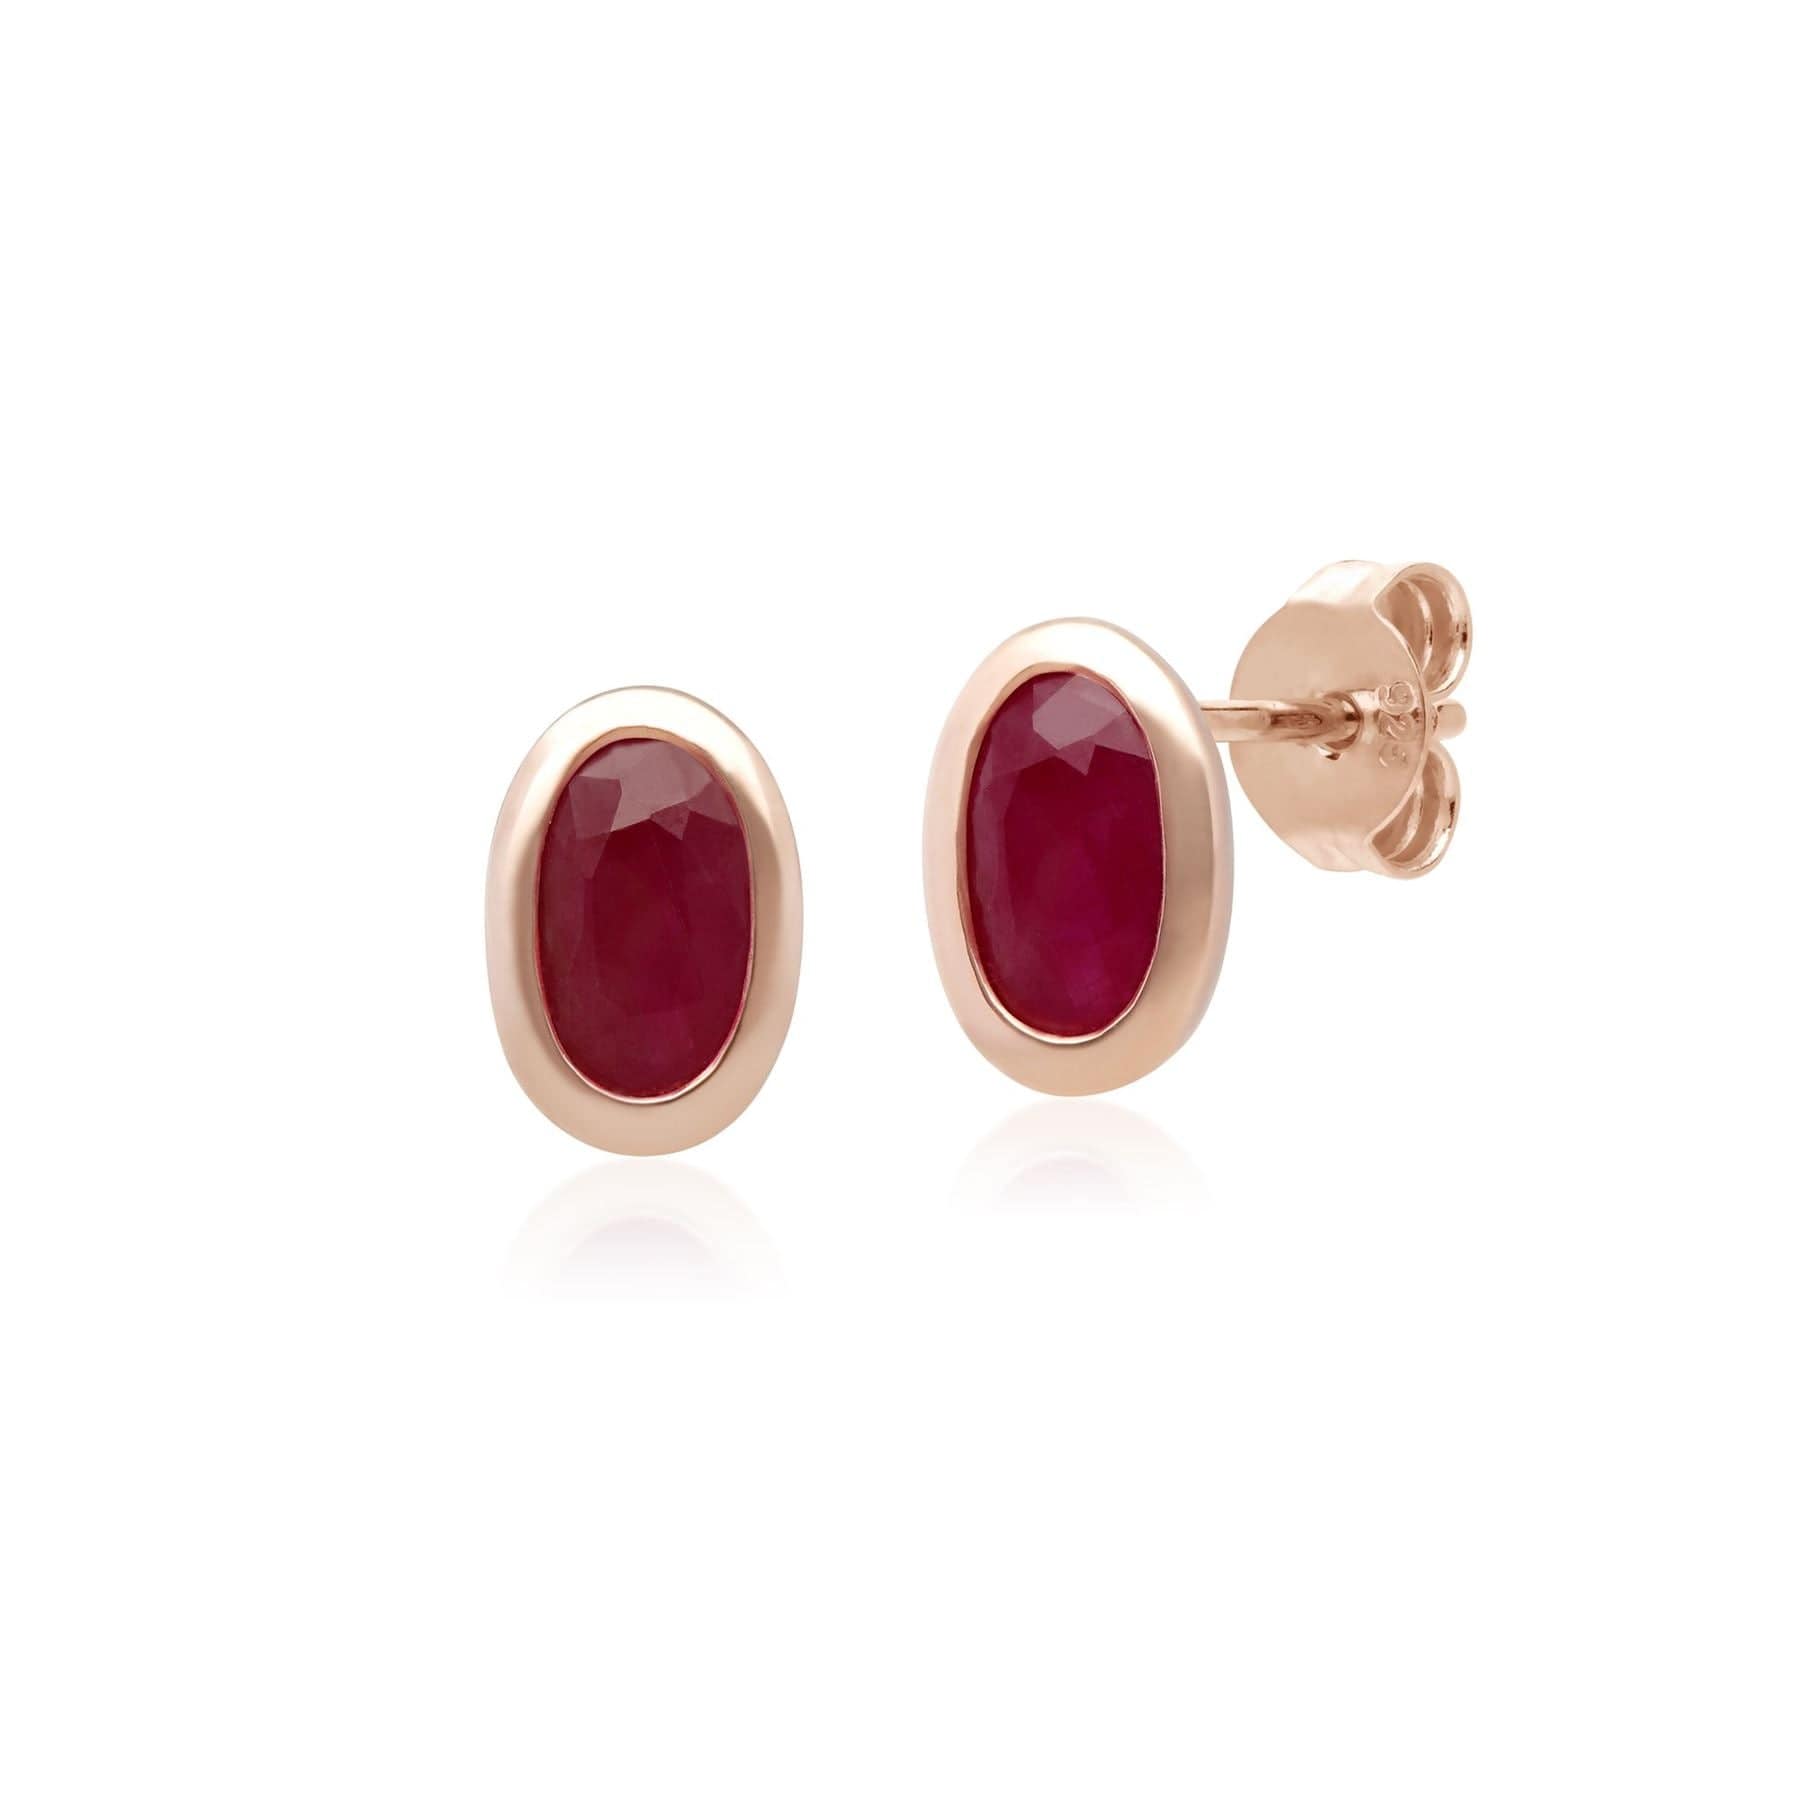 Classic Oval Ruby Stud Earrings in 9ct Rose Gold - Gemondo